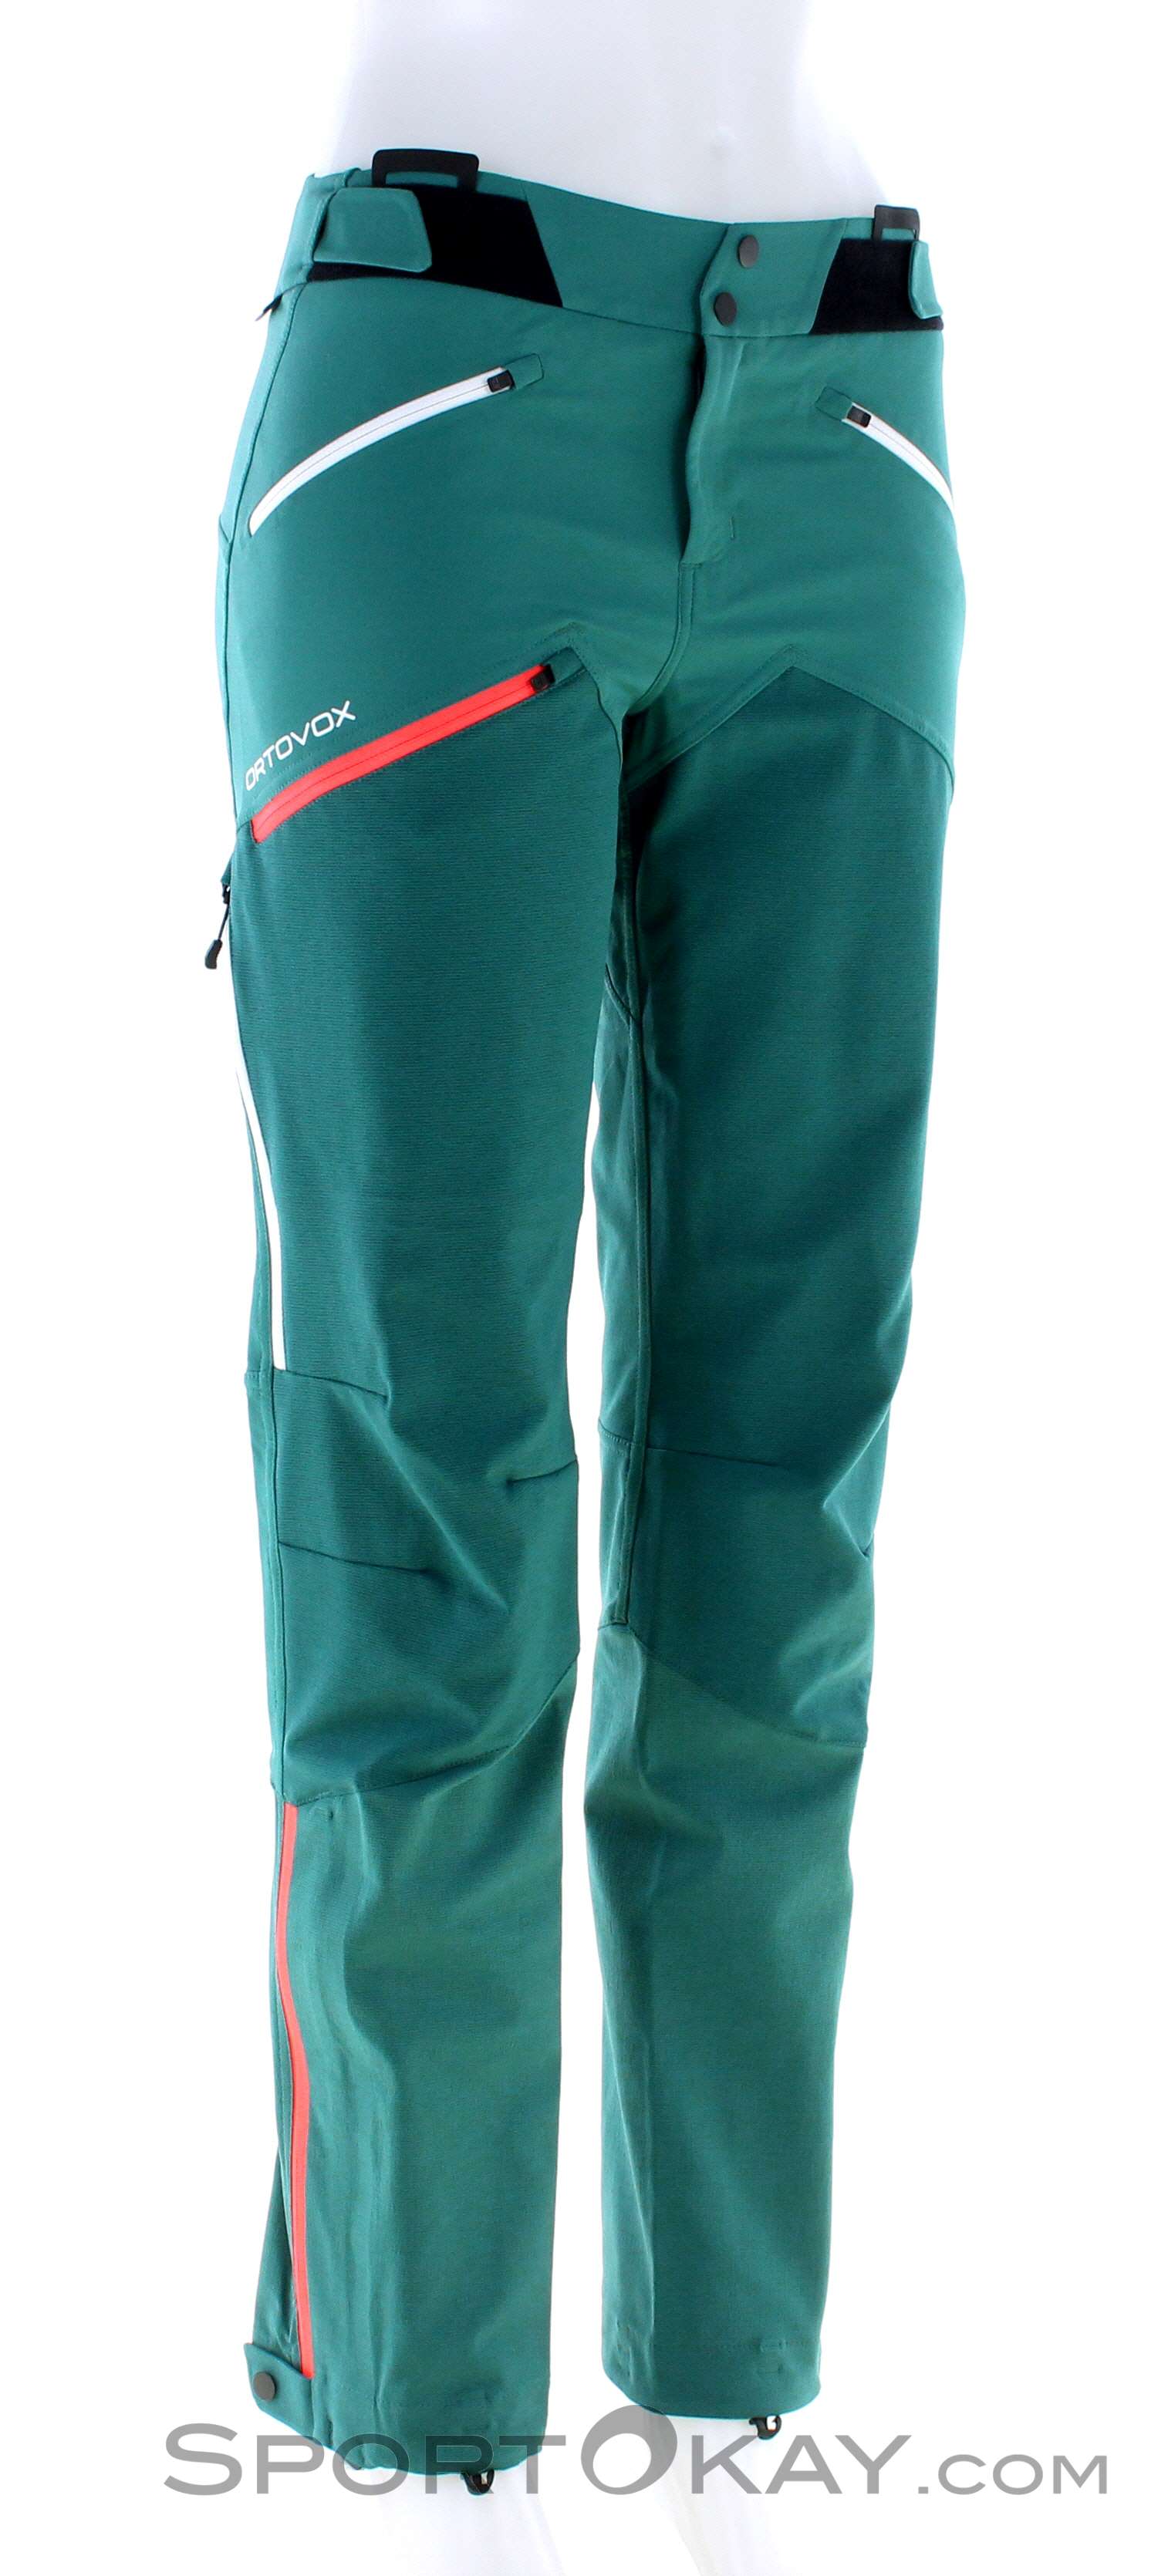 Ortovox Westalpen Softshell Women Outdoor Pants - Pants - Outdoor Clothing  - Outdoor - All